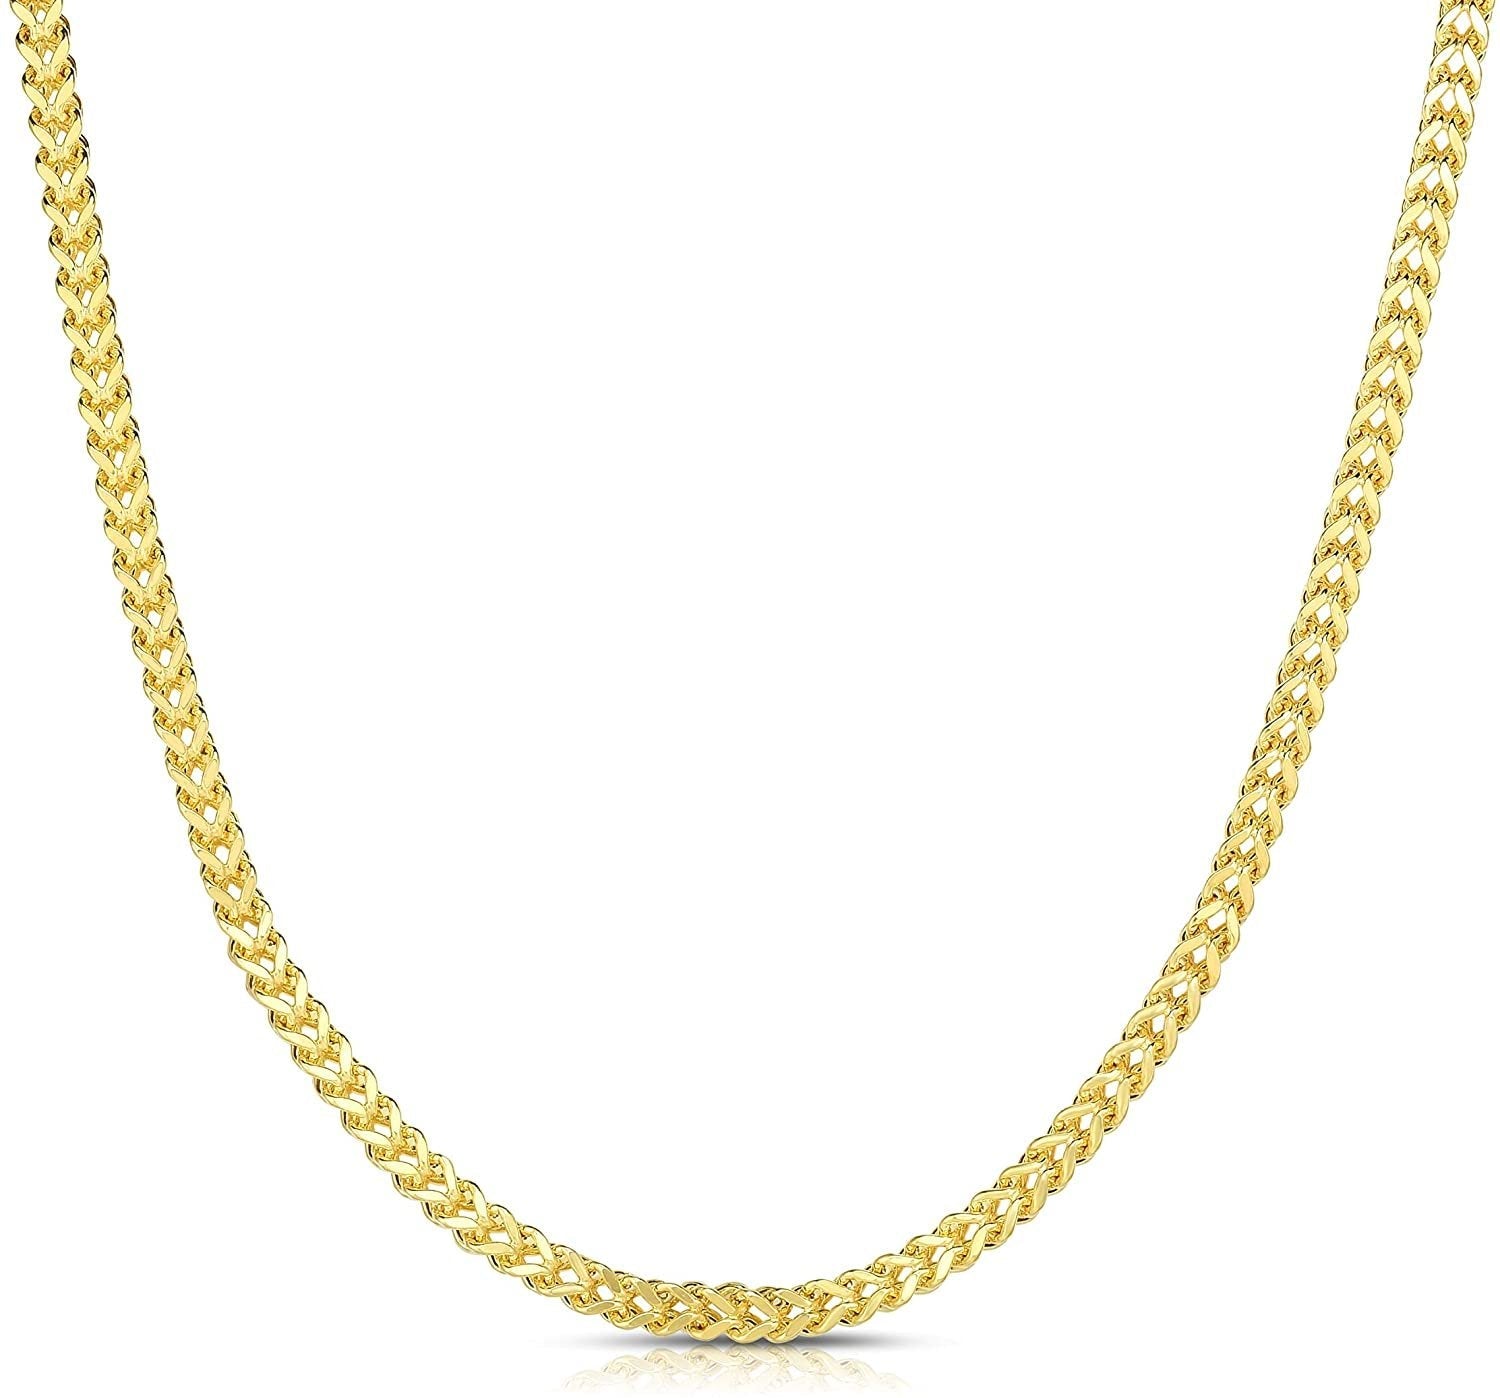 10k Yellow Gold 4.5mm Lightweight Franco Chain Necklace, 18 Inch